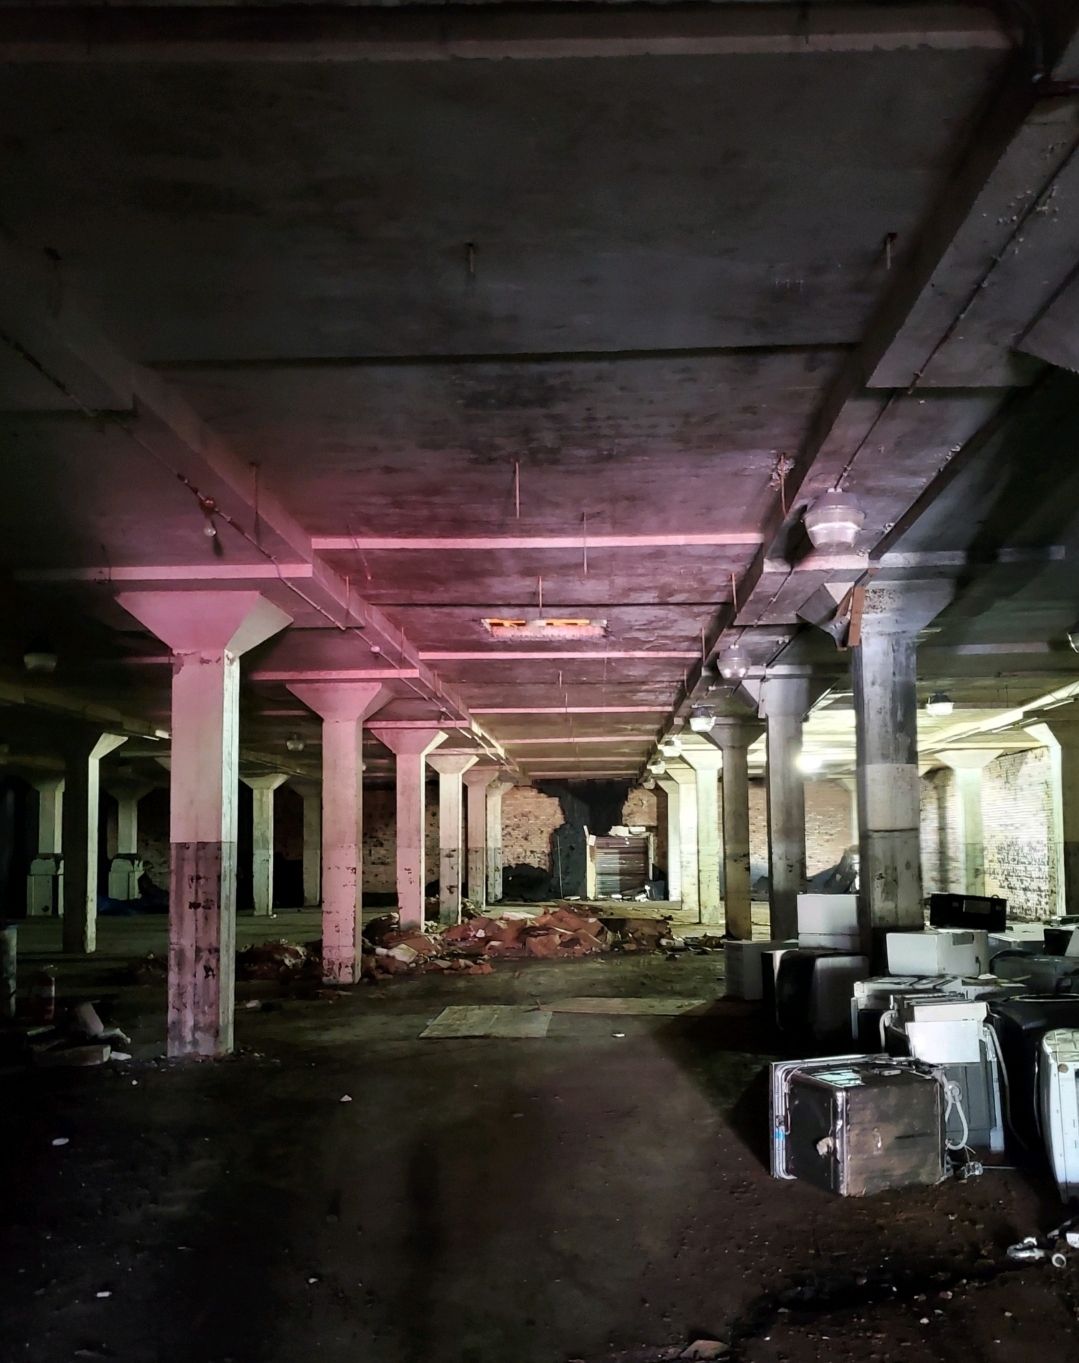 A photo of the inside of a Des Moines warehouse.